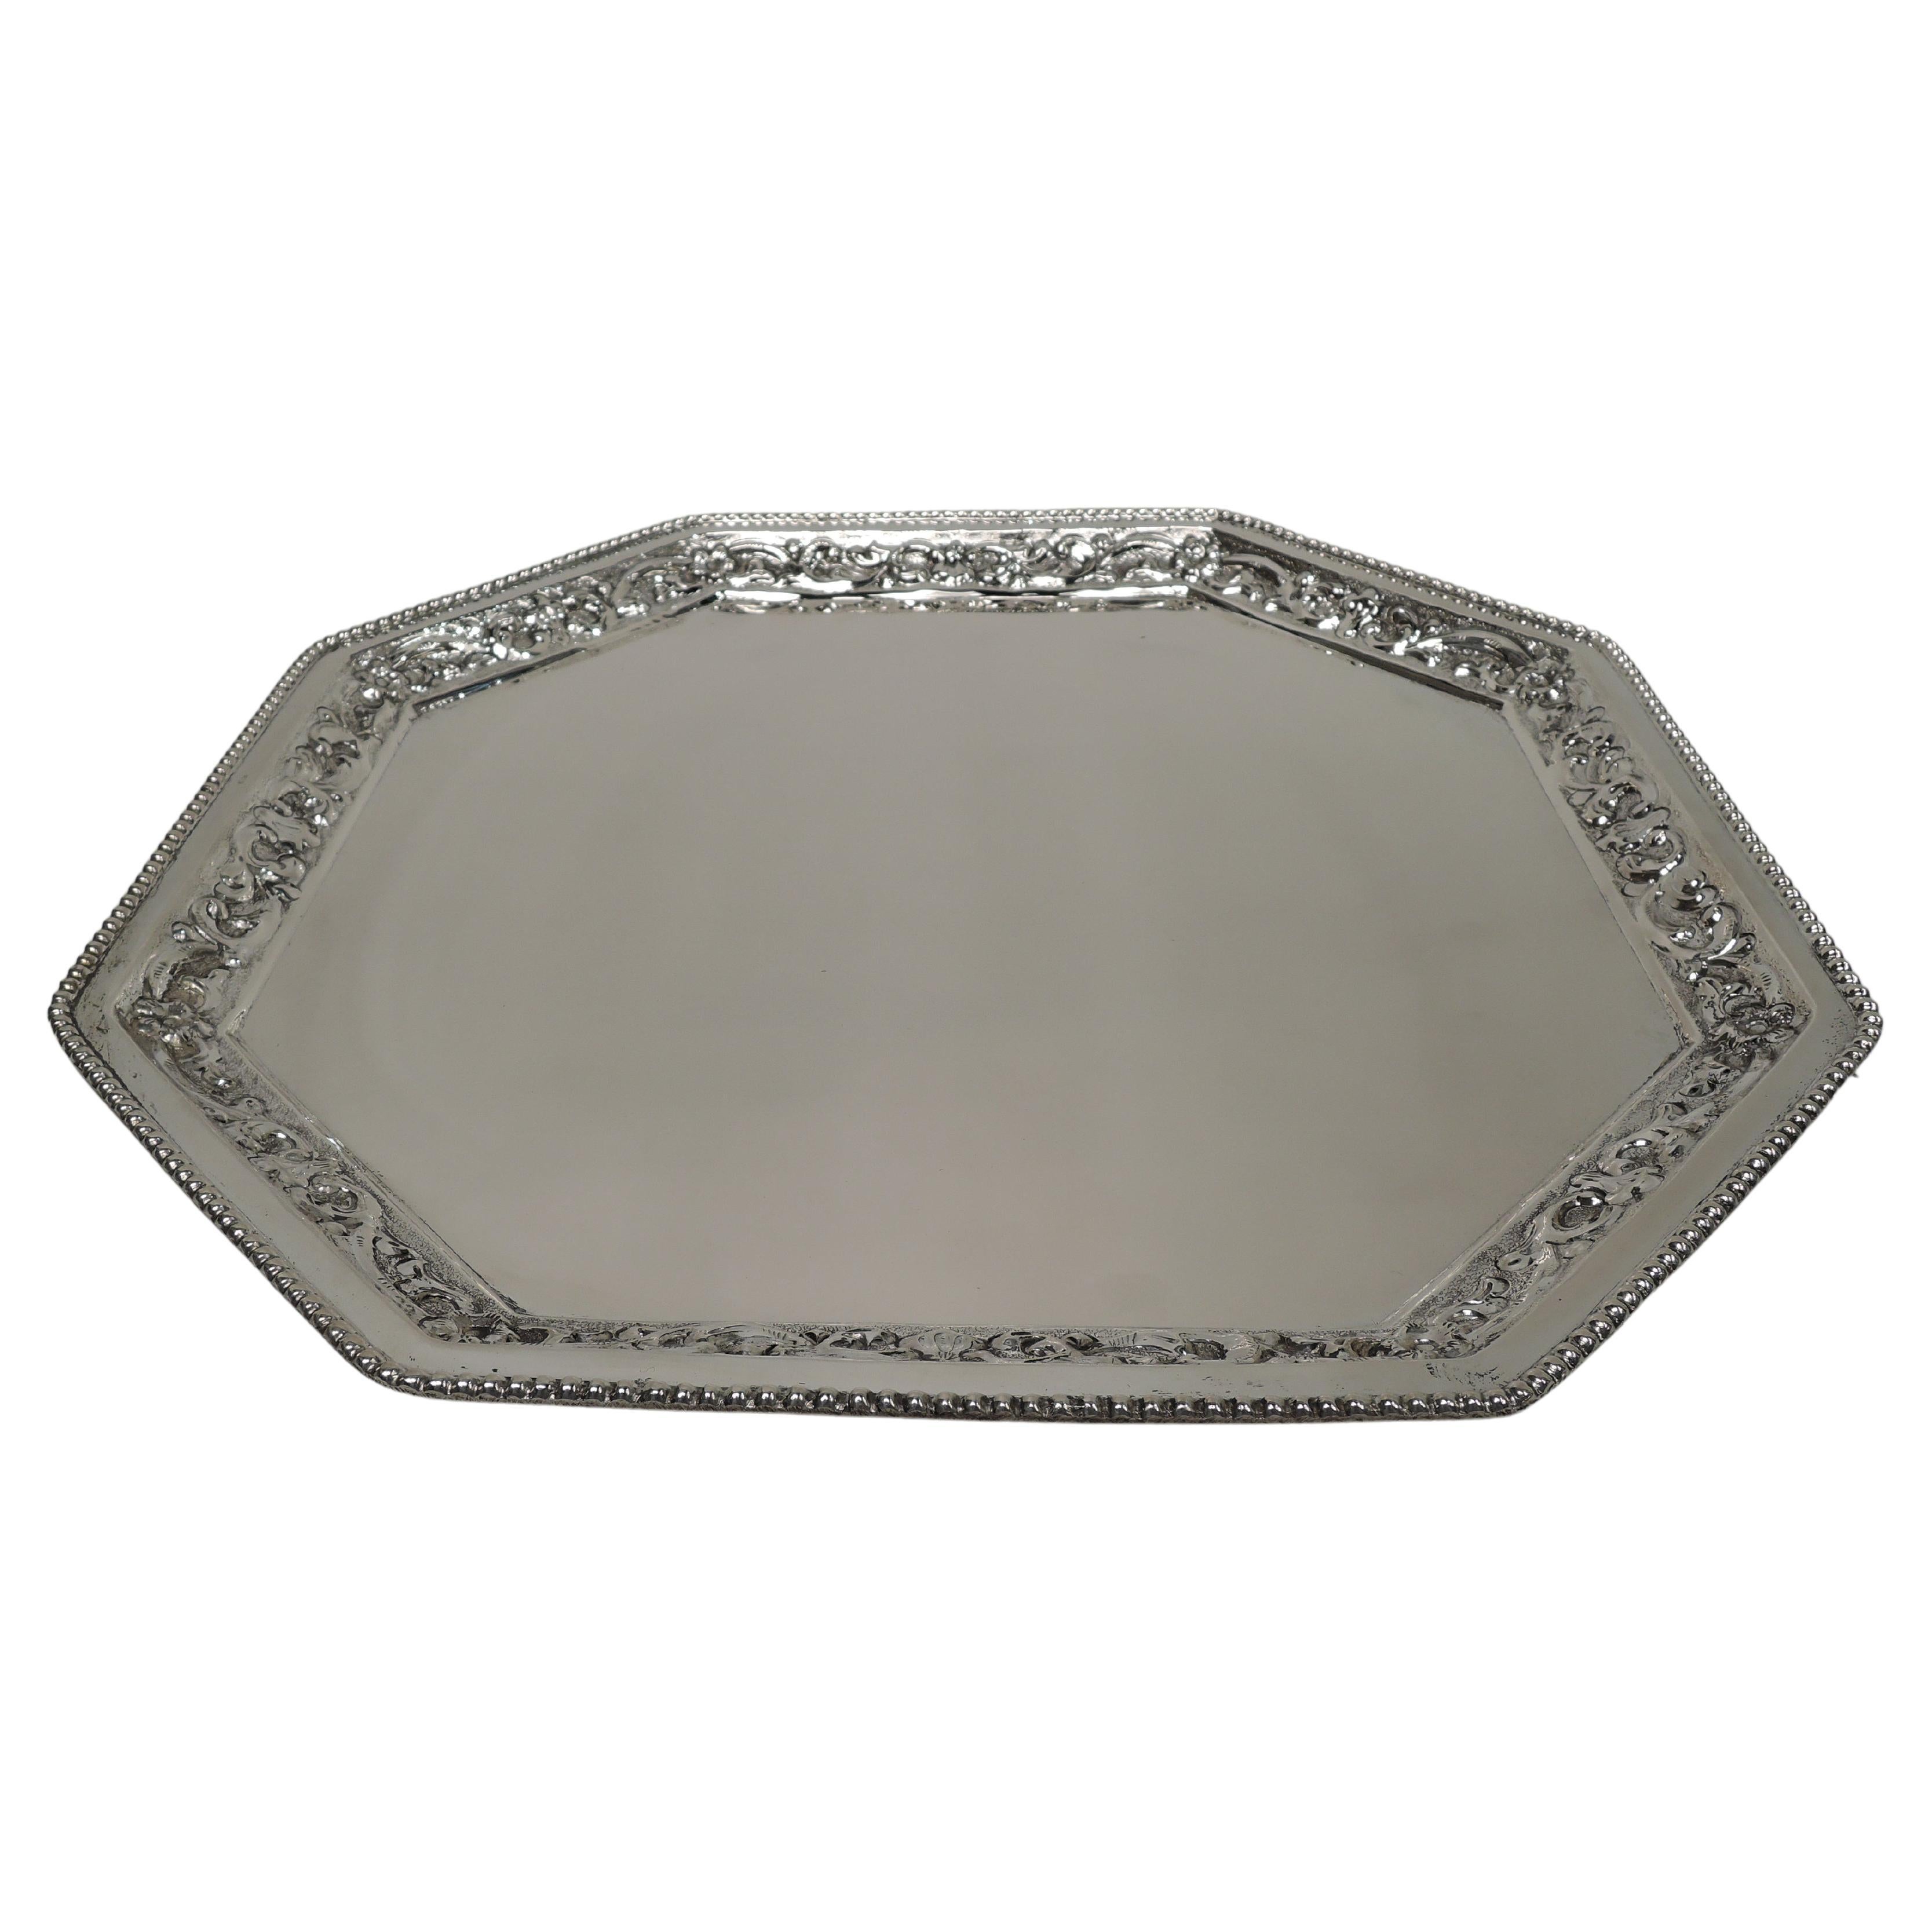 Pretty Classical Silver Octagonal Tray with Beading & Scrollwork